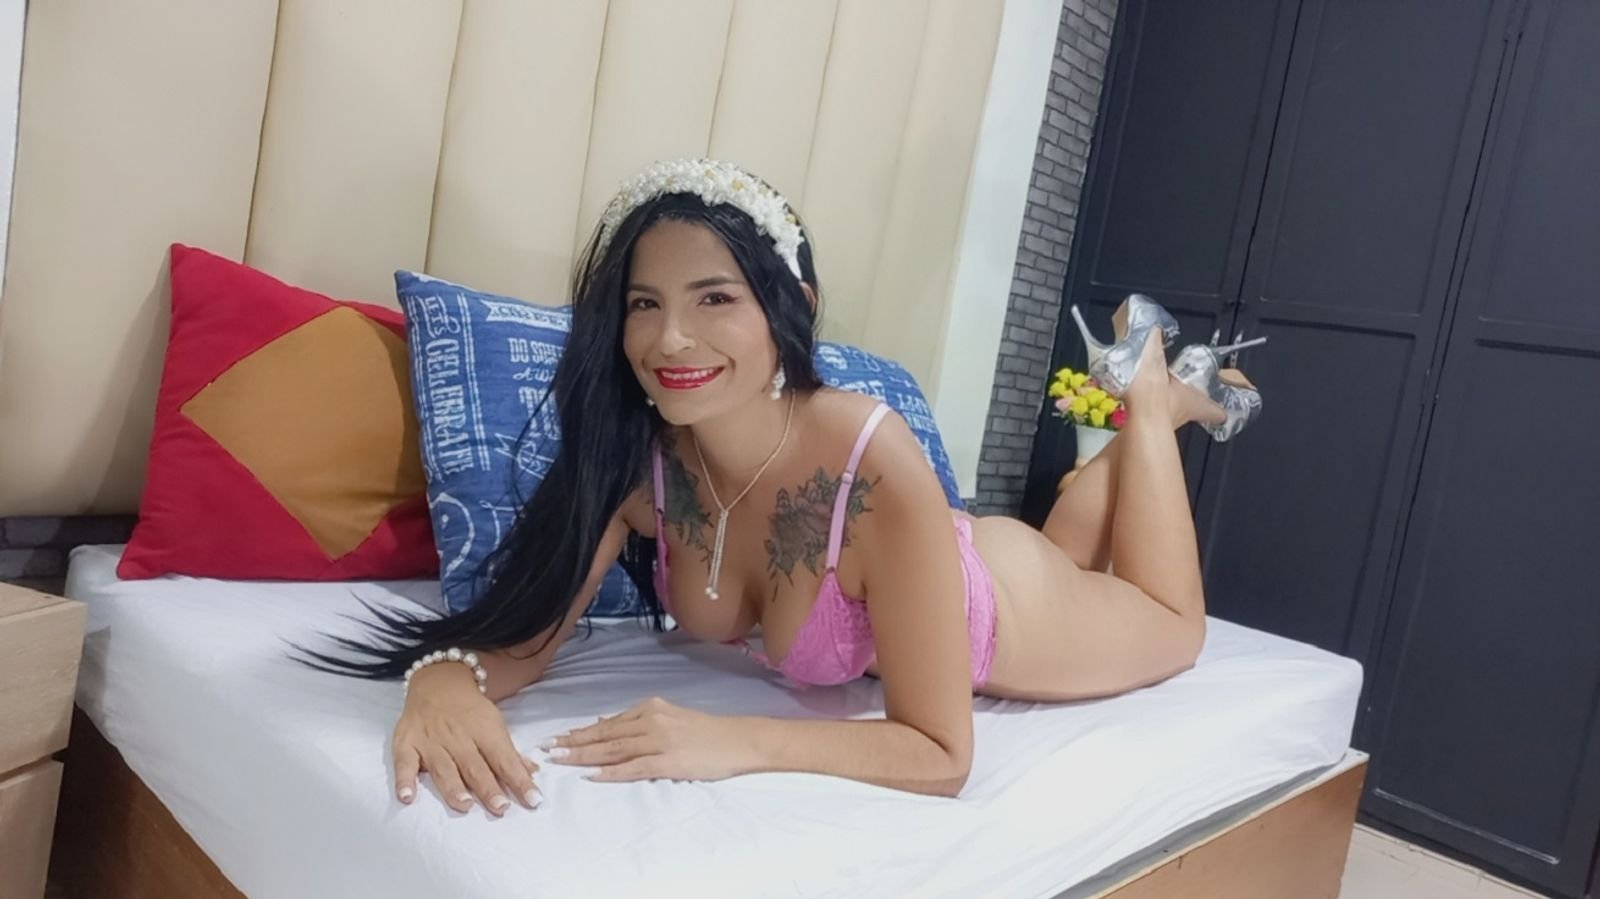 SkyPrivate live sex chat with KarolynRoss